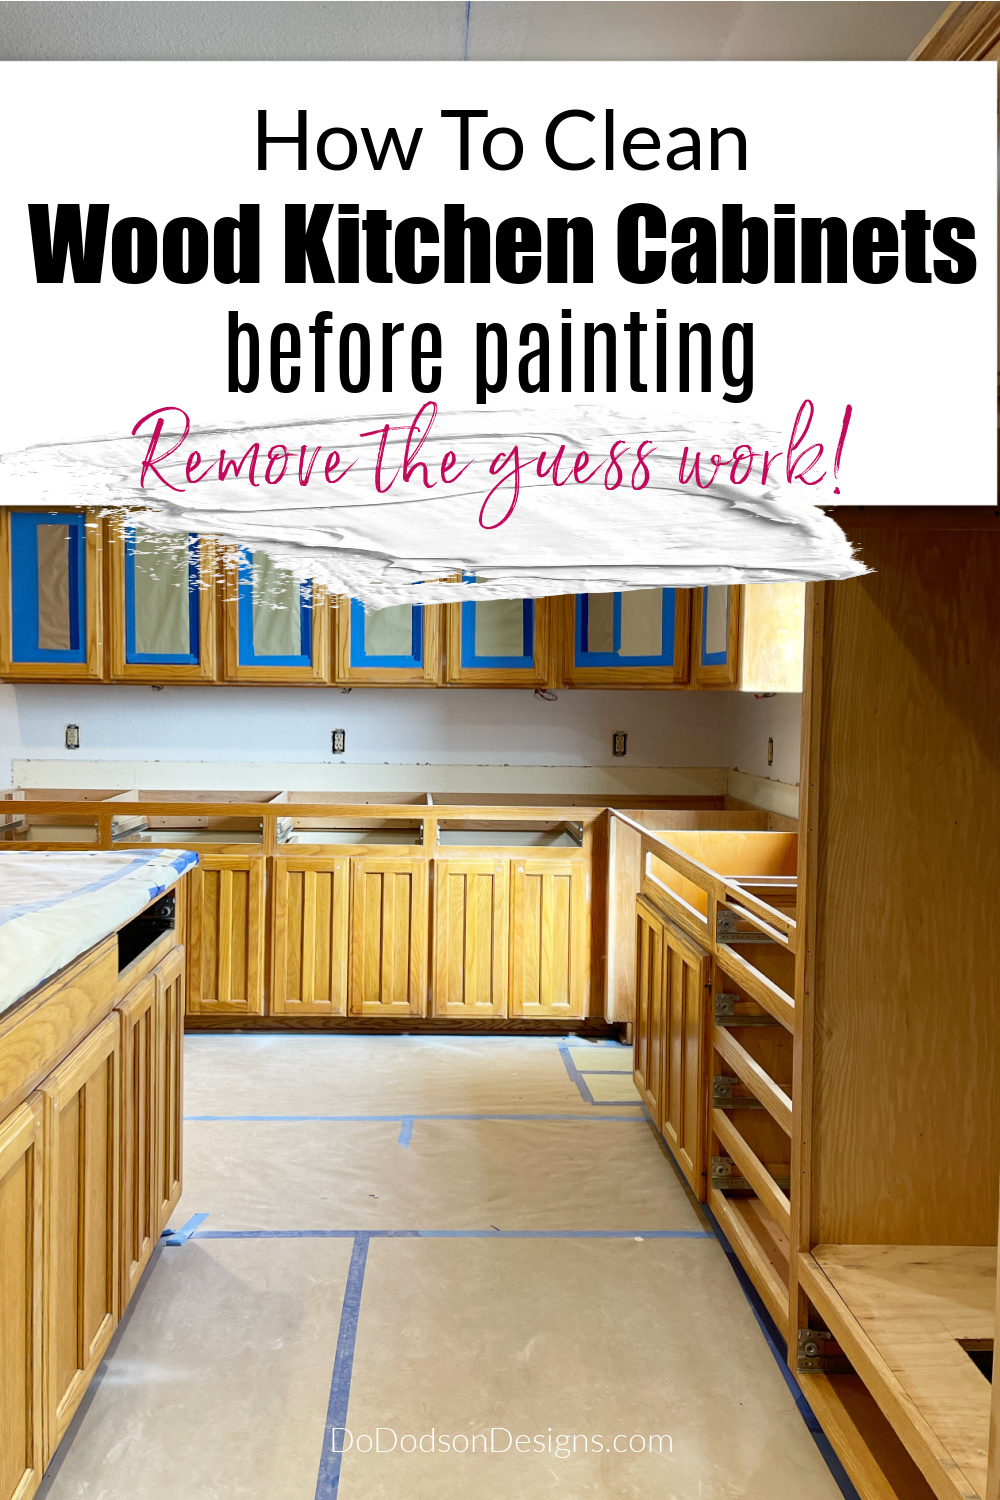 Best paint for kitchen cabinets: 8 paints for cupboard doors